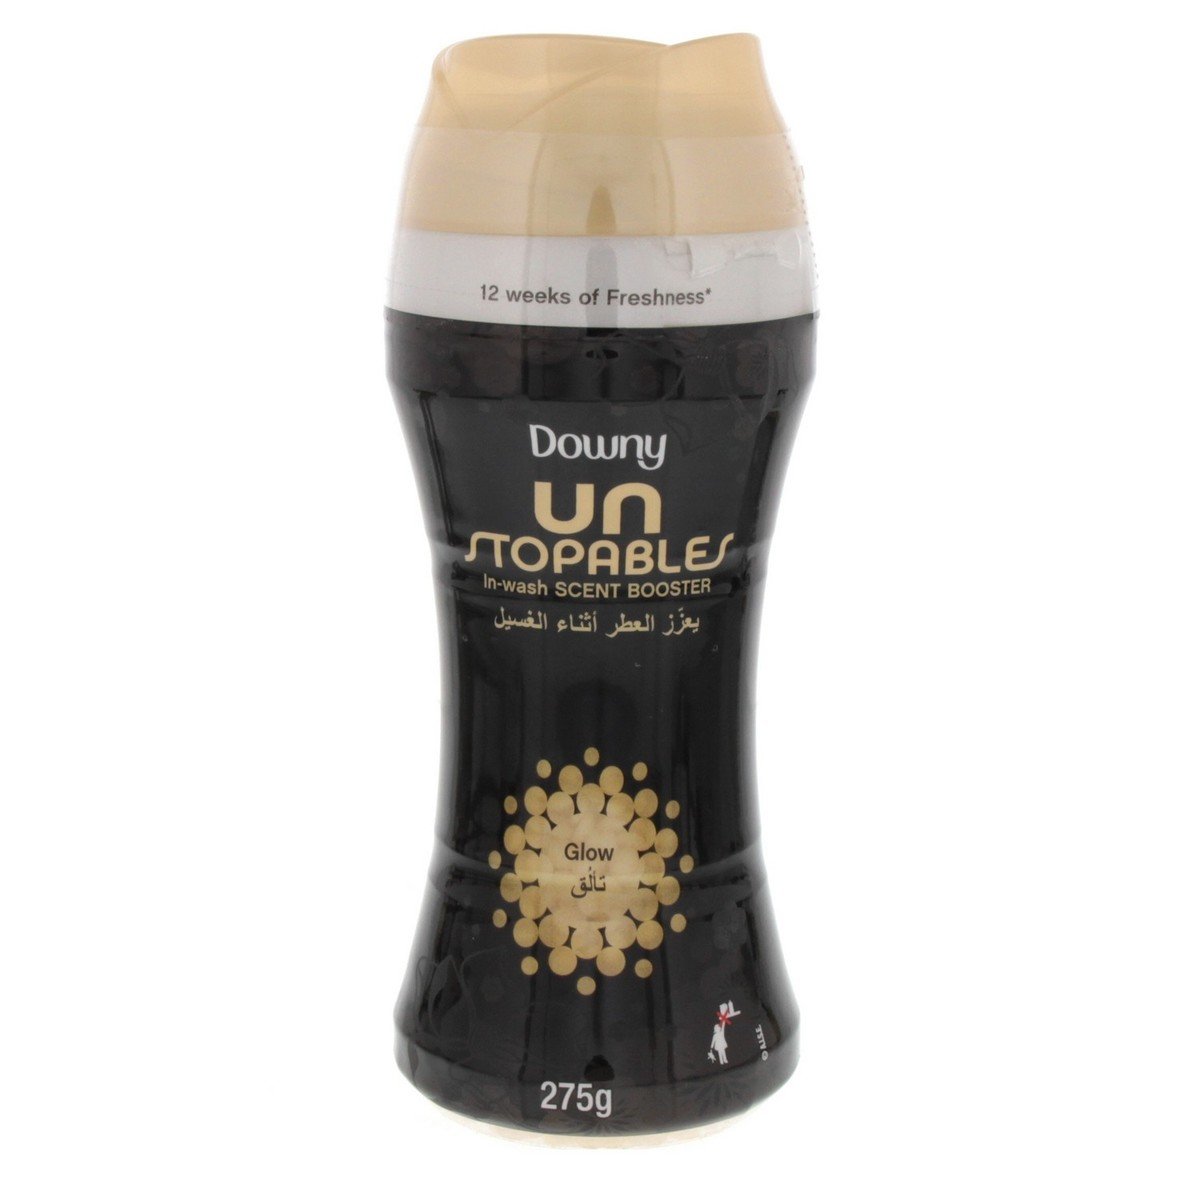 Downy Unstoppables Scent Booster Glow 275g